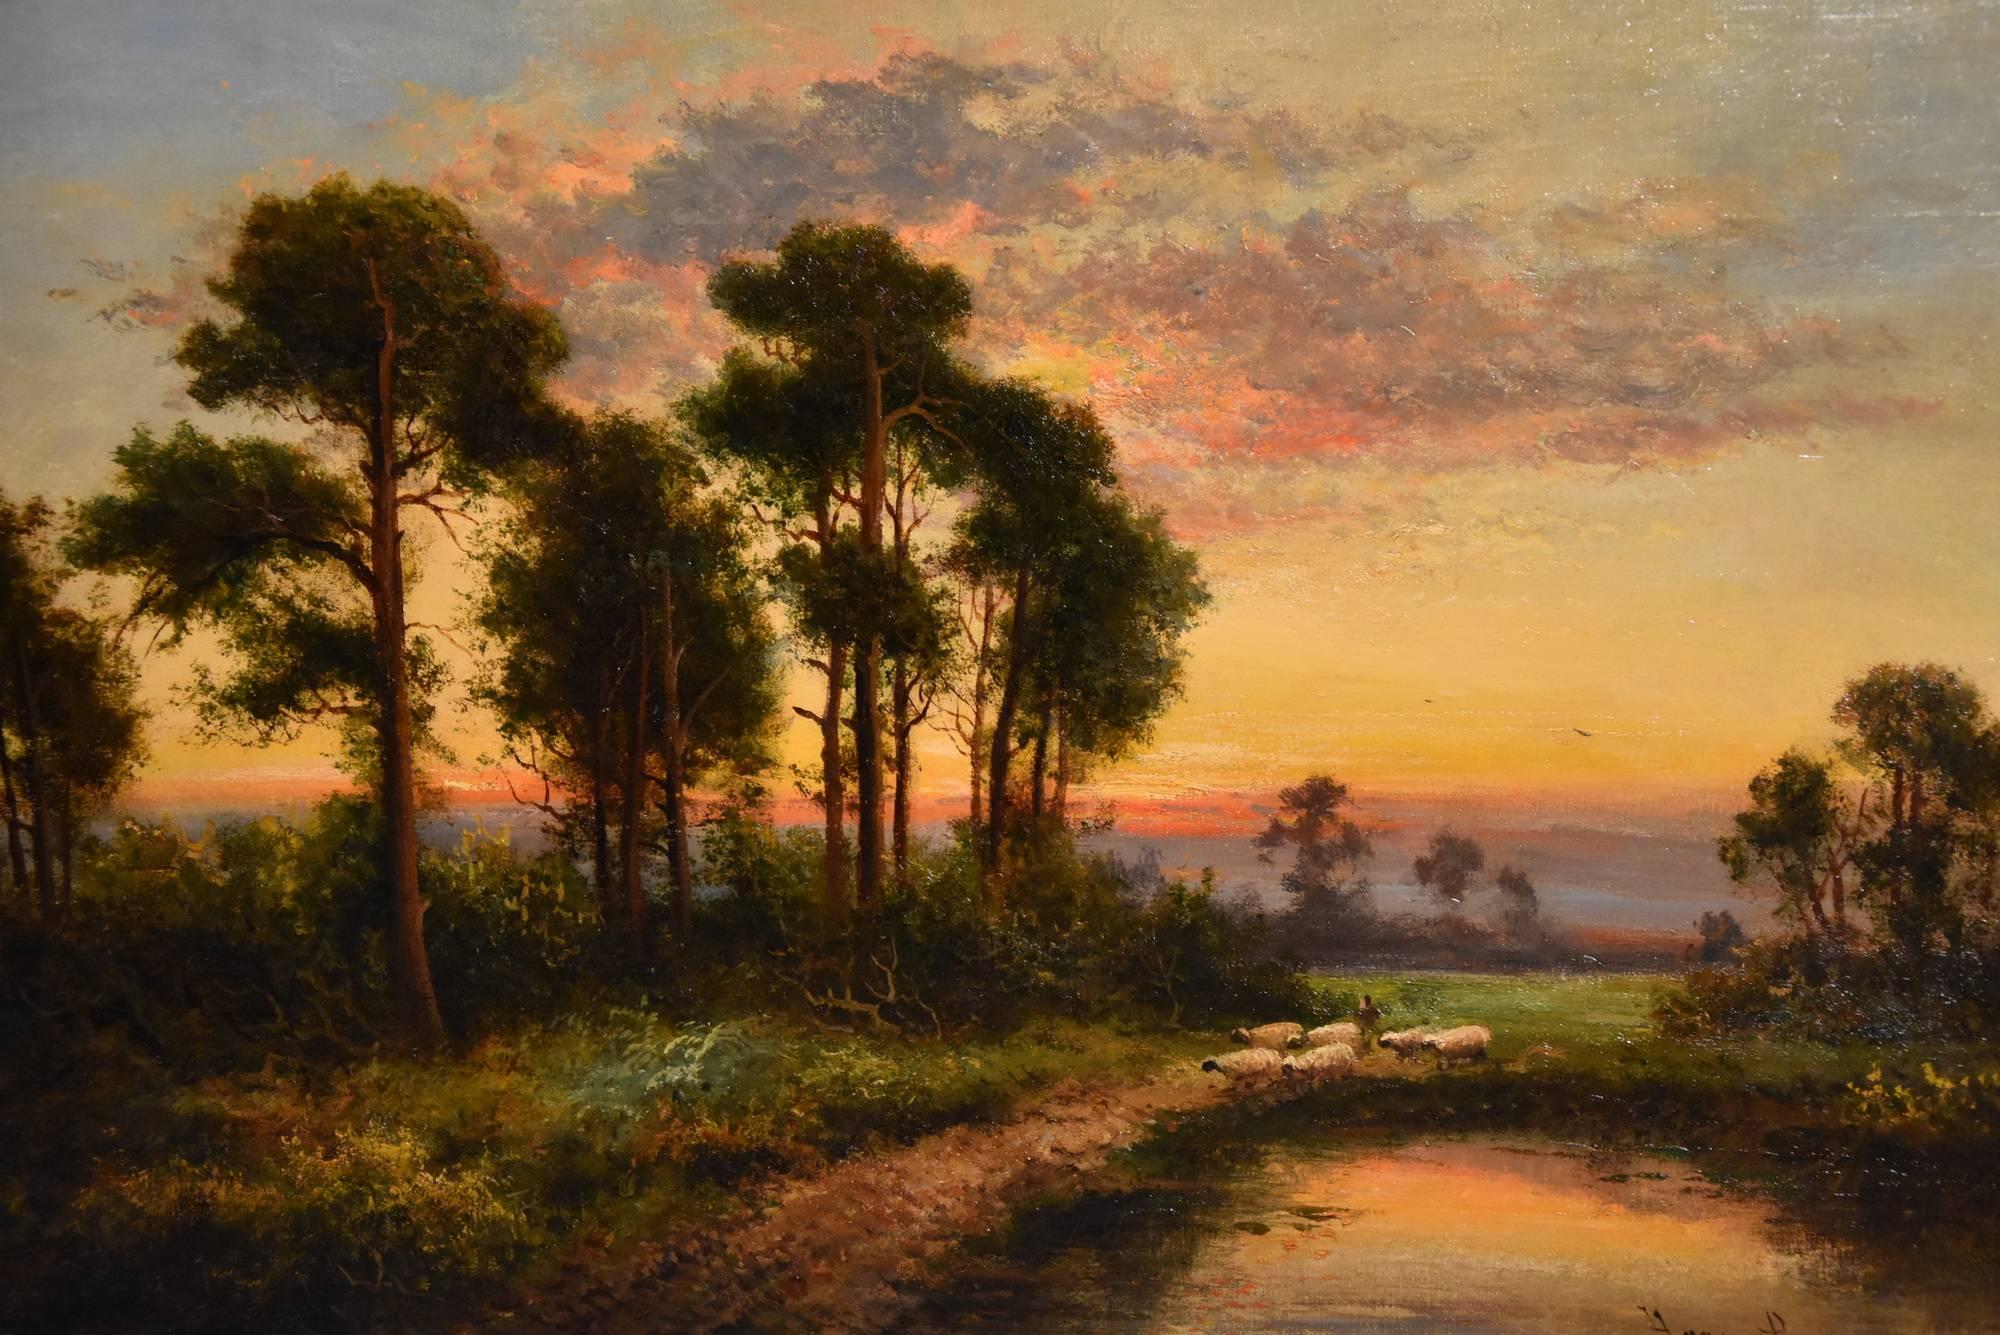 "Sunset" by Henry Cooper. He flourished between 1890-1925. A survey painter of local views and scenery. Oil on canvas. Signed. 

Dimensions Unframed:
width 24" (61 cm),
height 16" (41 cm).

All of the items that we